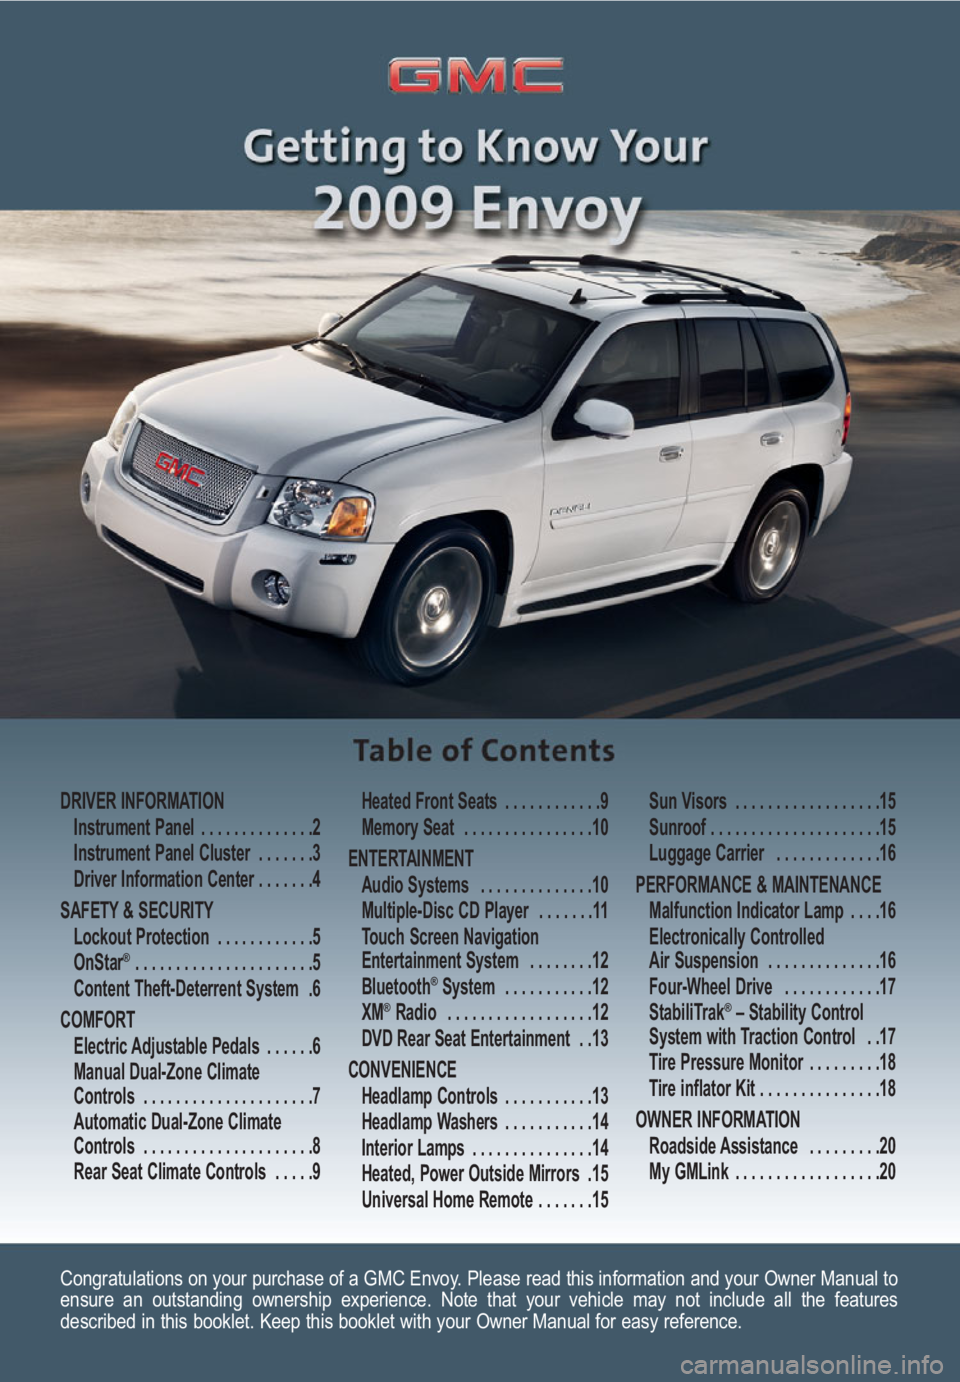 GMC ENVOY 2009  Get To Know Guide 